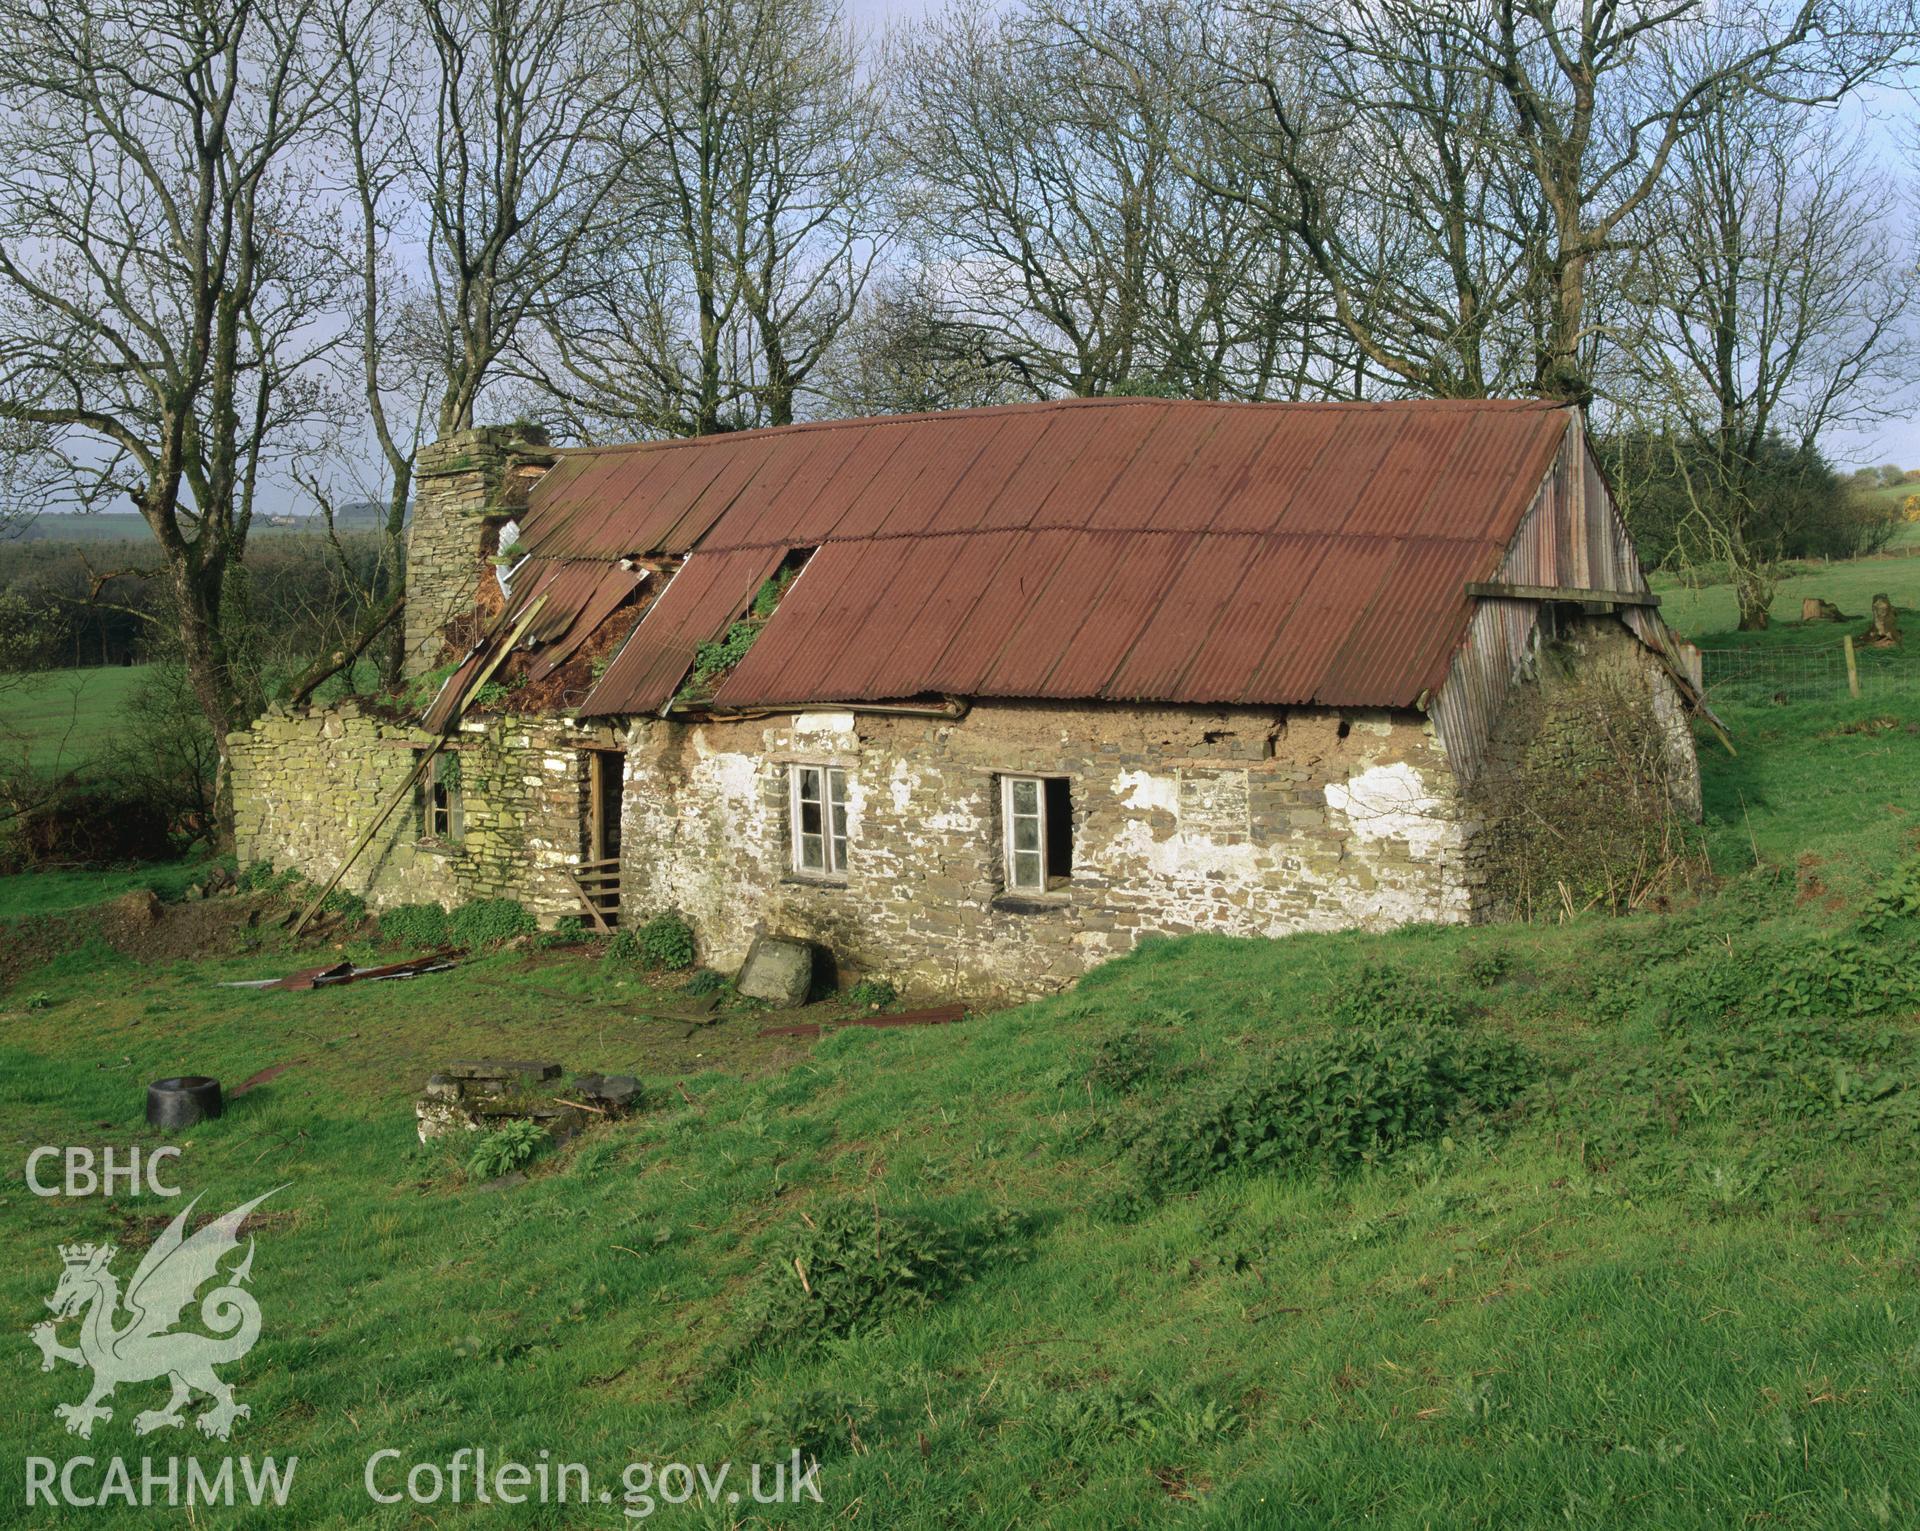 Colour transparency showing an exterior view of Ynys-Felen, Ceredigion , produced by Iain Wright, June 2004.